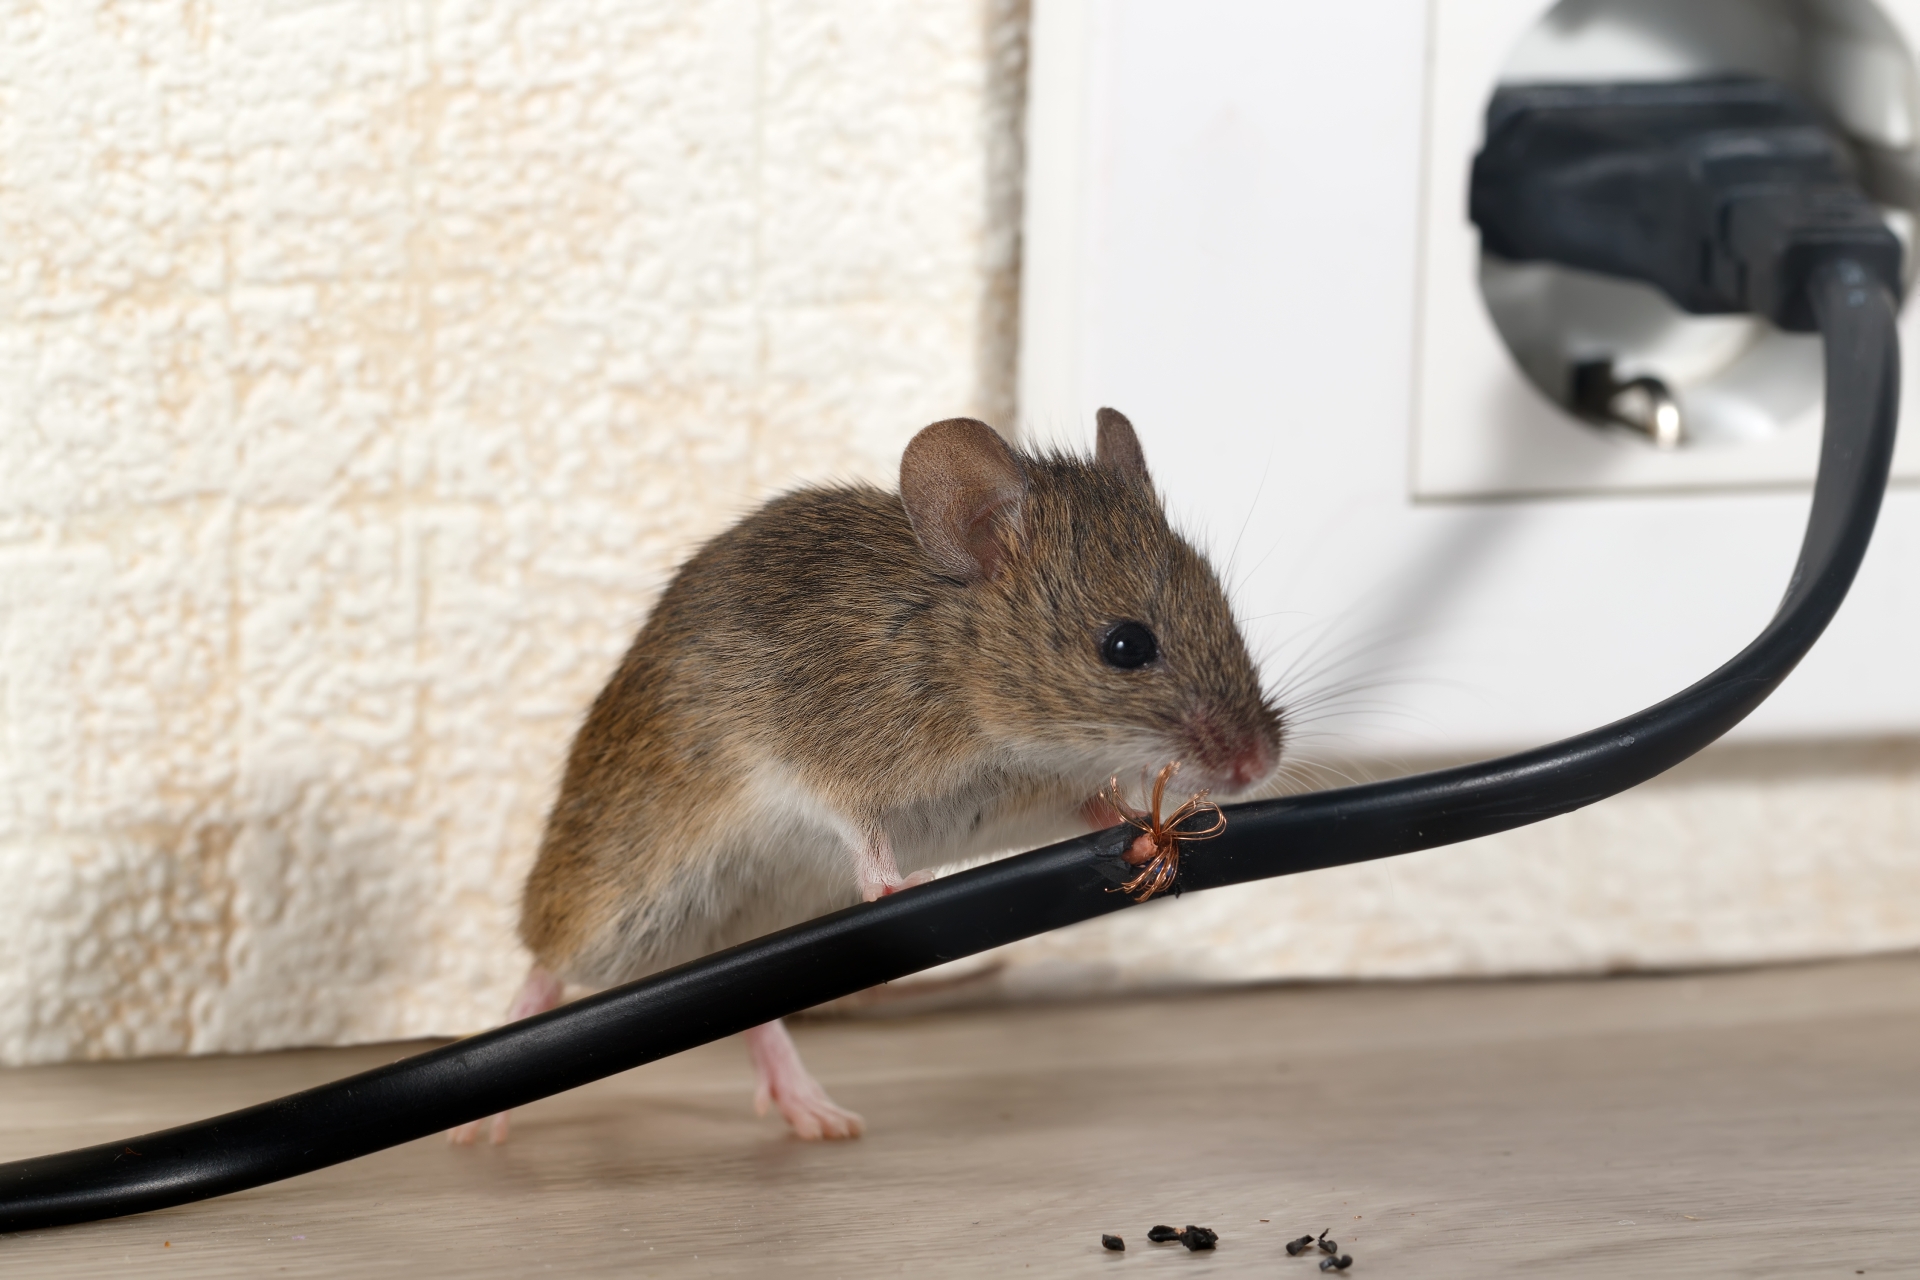 Mice Infestation, Pest Control in South Kensington, SW7. Call Now 020 8166 9746